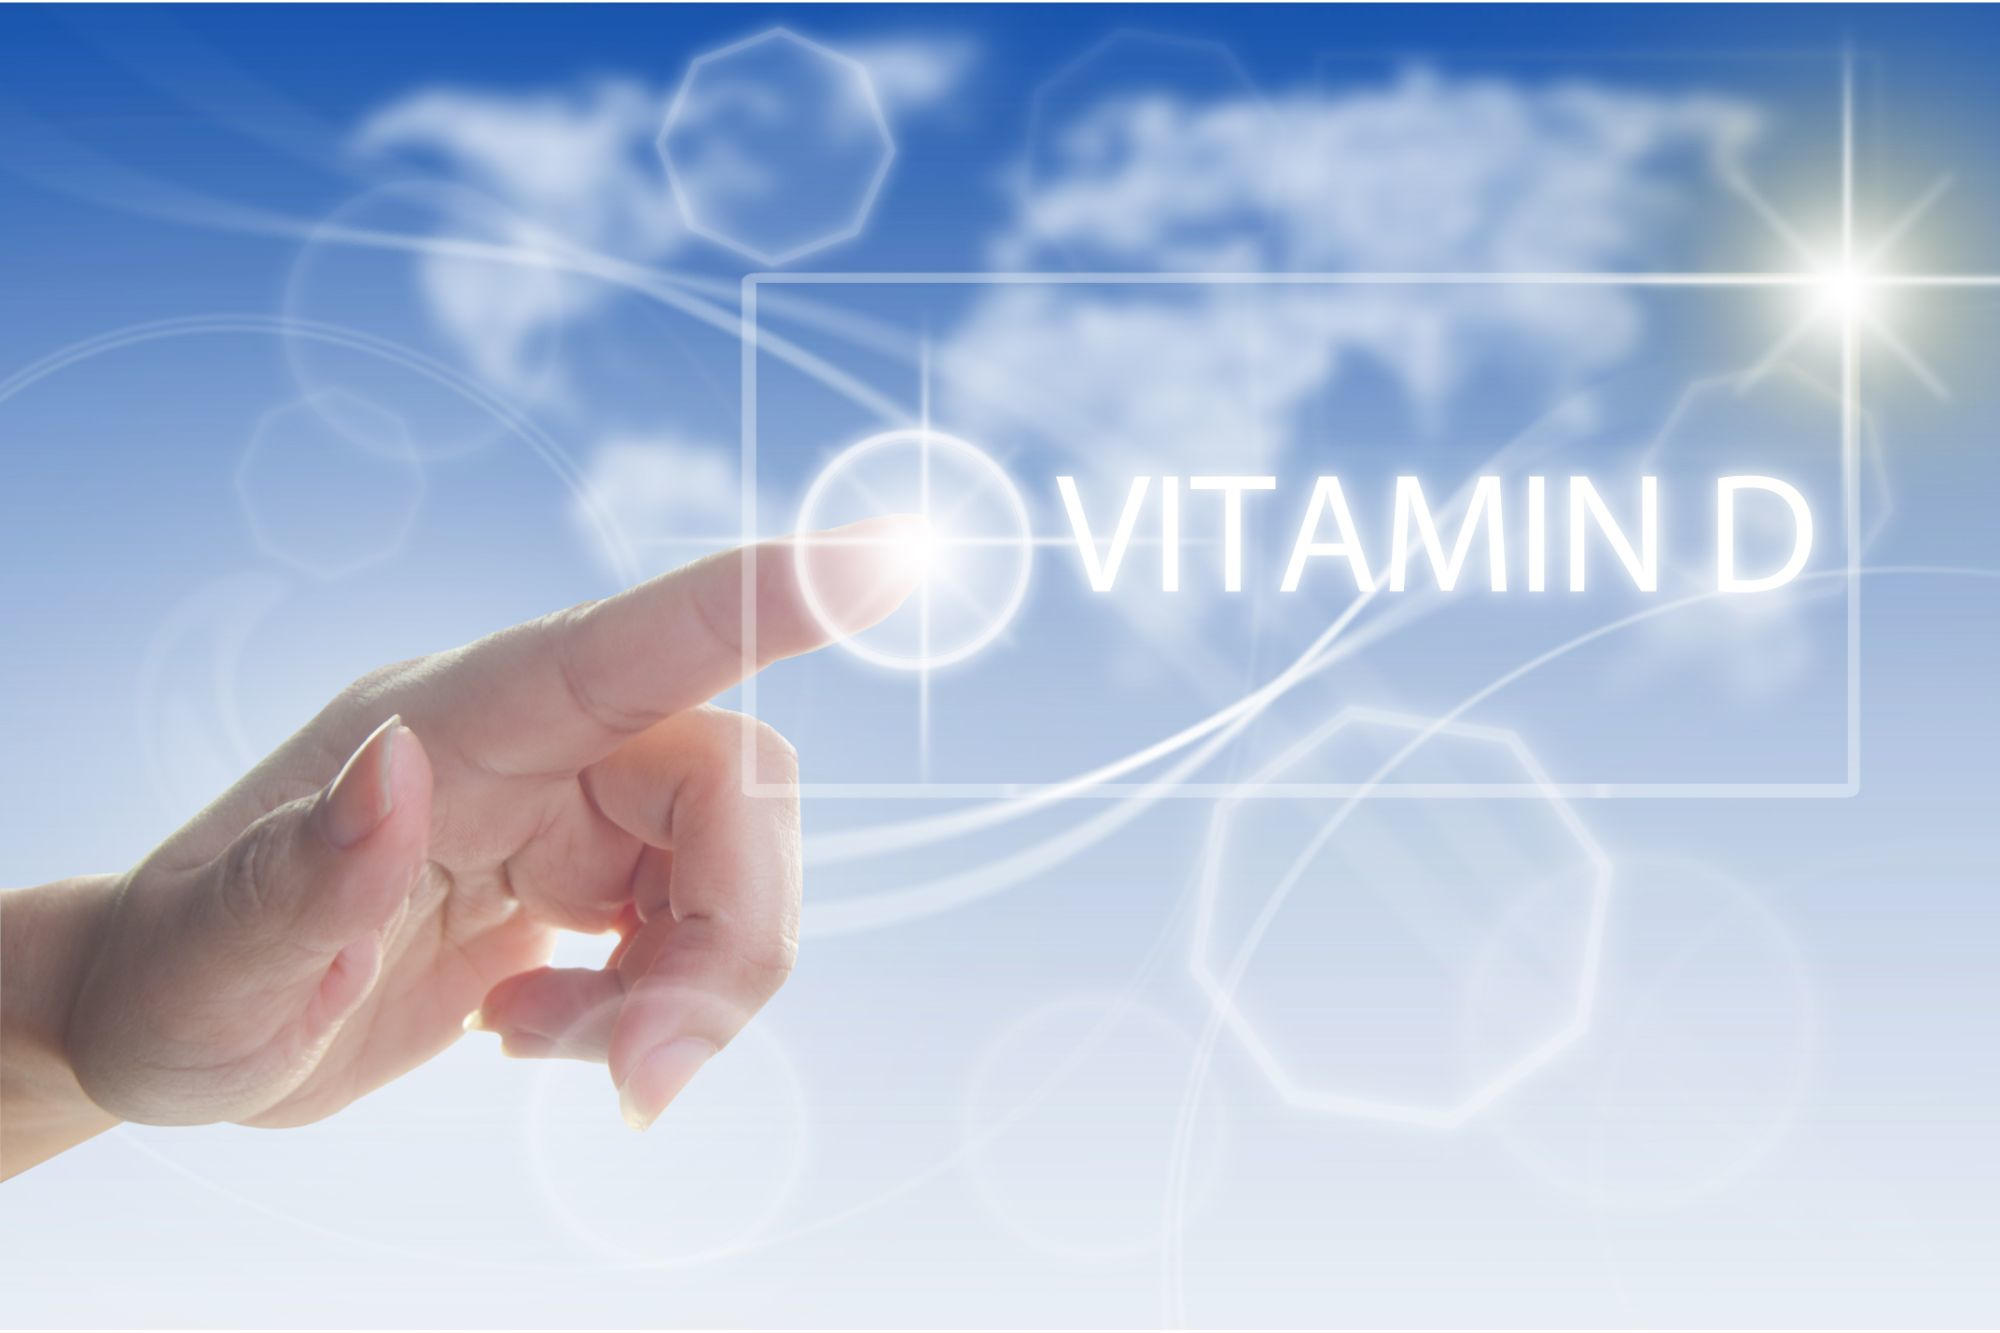 Vitamin D's Impact on Health: New Study Suggests Body Weight Matters - SciTechDaily